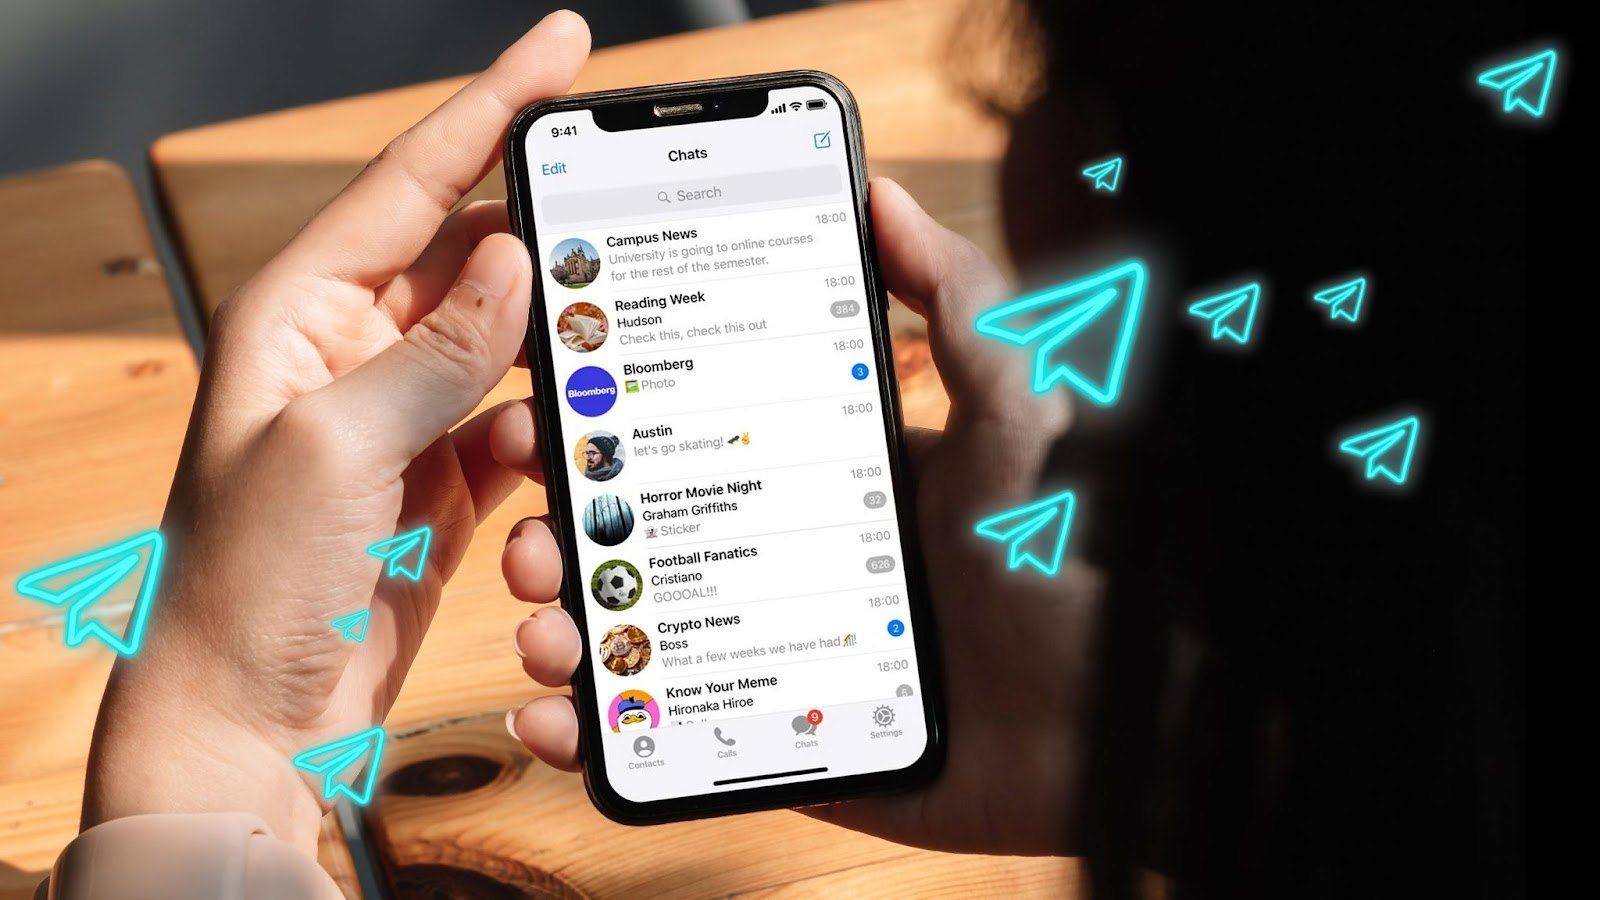 10 Fun Facts About The Telegram App